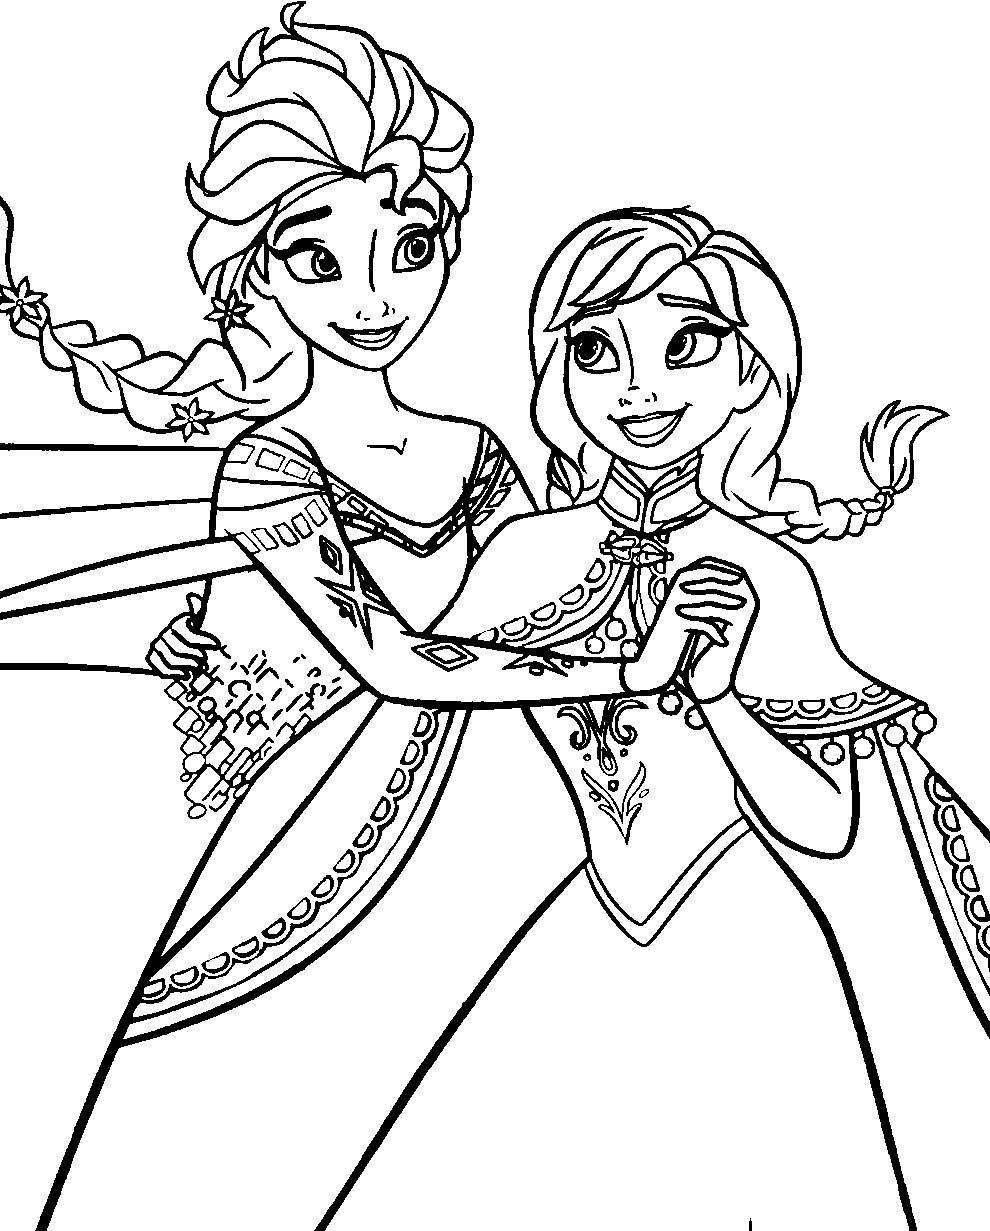 Printable Coloring Sheets Frozen
 Disney Frozen Coloring Pages To Download